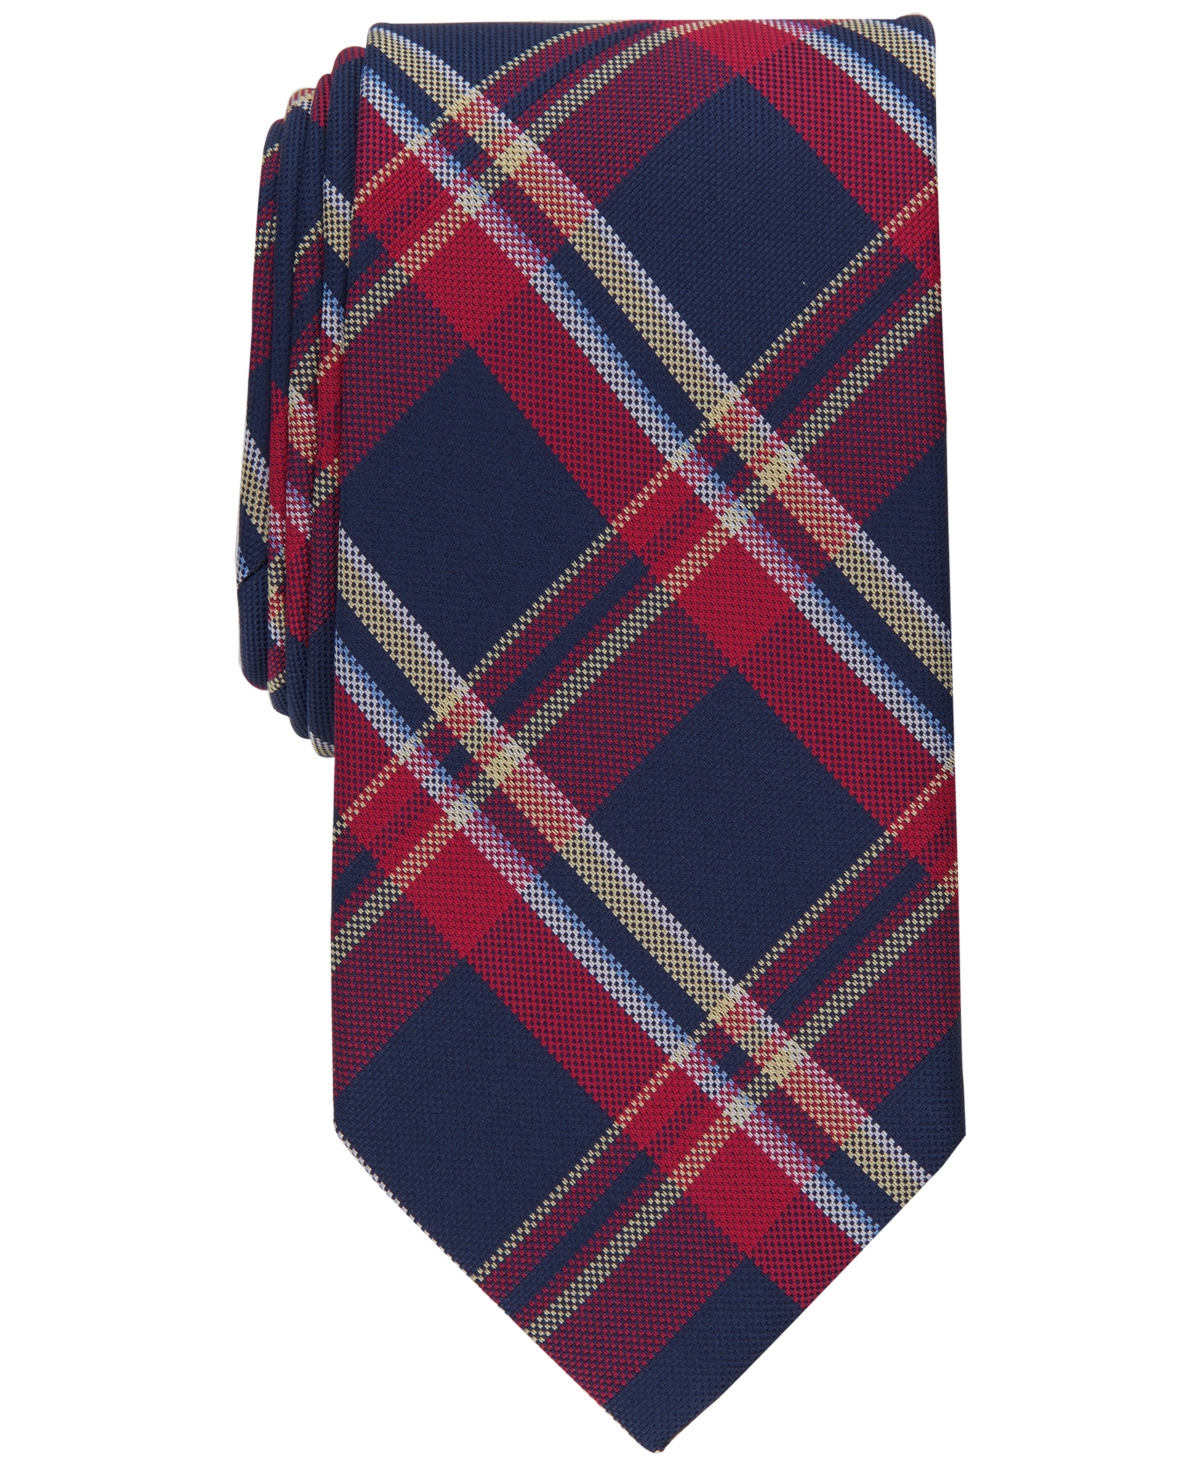 Men's Tallon Plaid Tie, Created for Macy's - Red